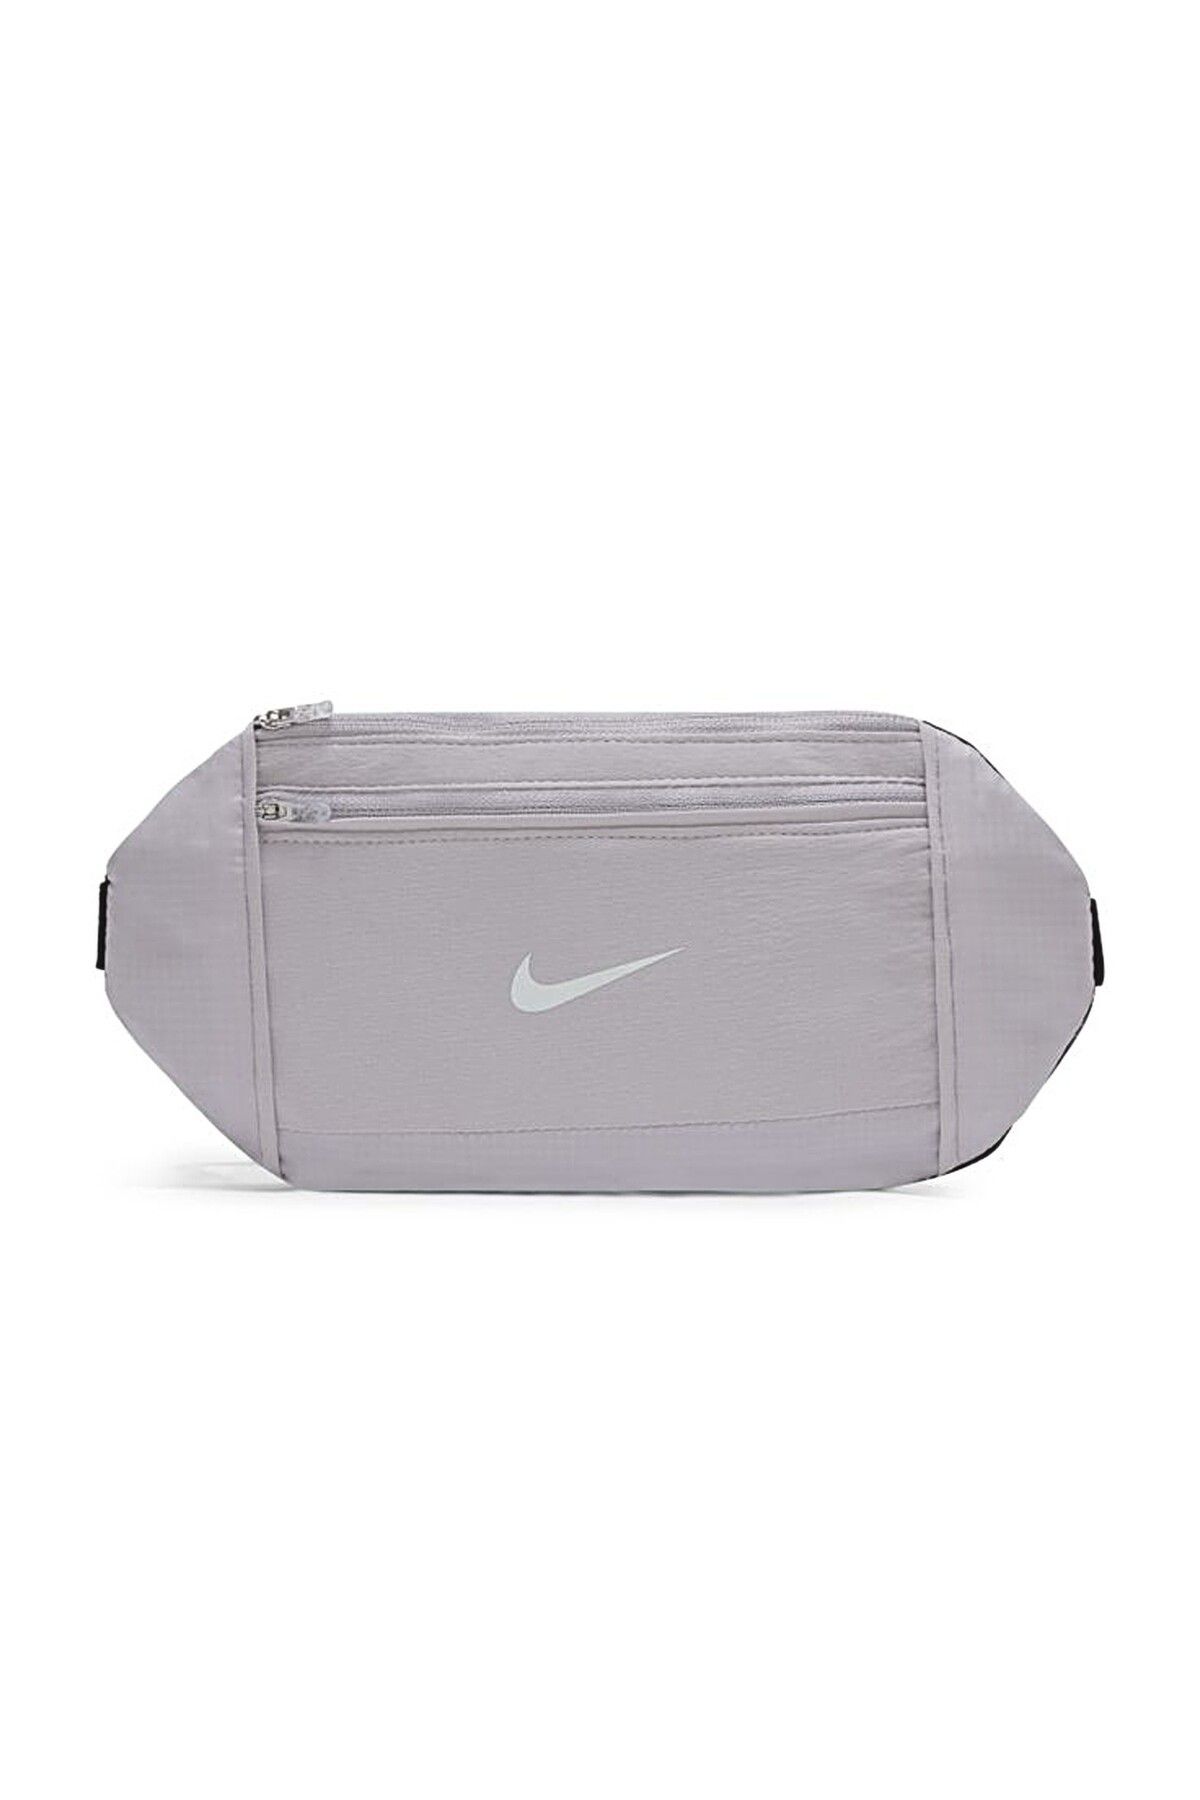 Nike Challenger Waist Pack Large Silver Lilac/black/silver O, One Size/10